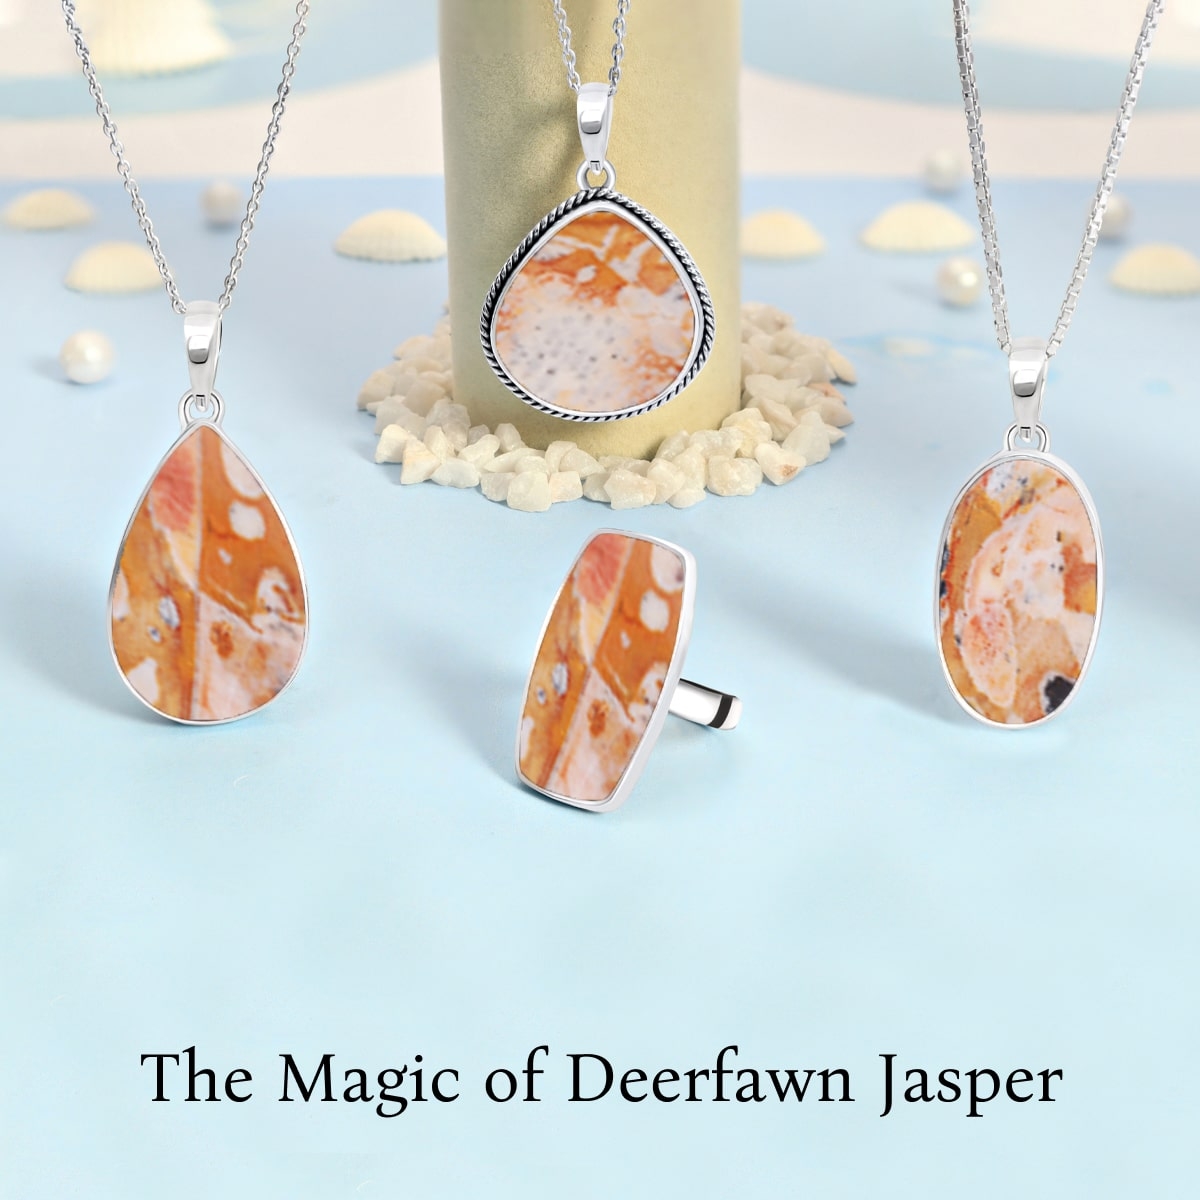 Deerfawn Jasper Meaning, History Healing Properties, Benefits, Uses, and Care